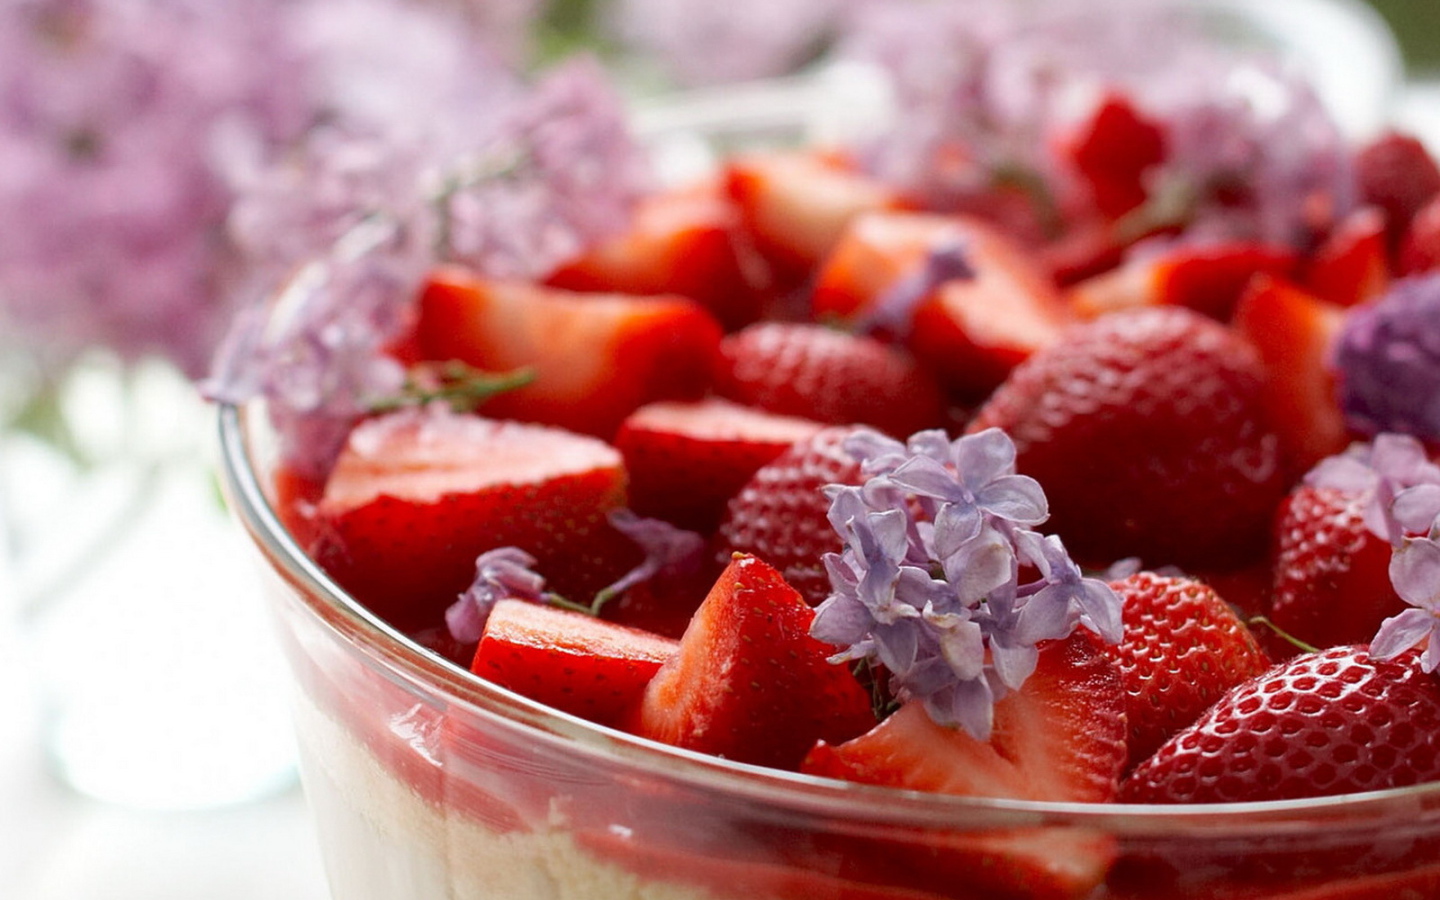 Strawberries and lilac